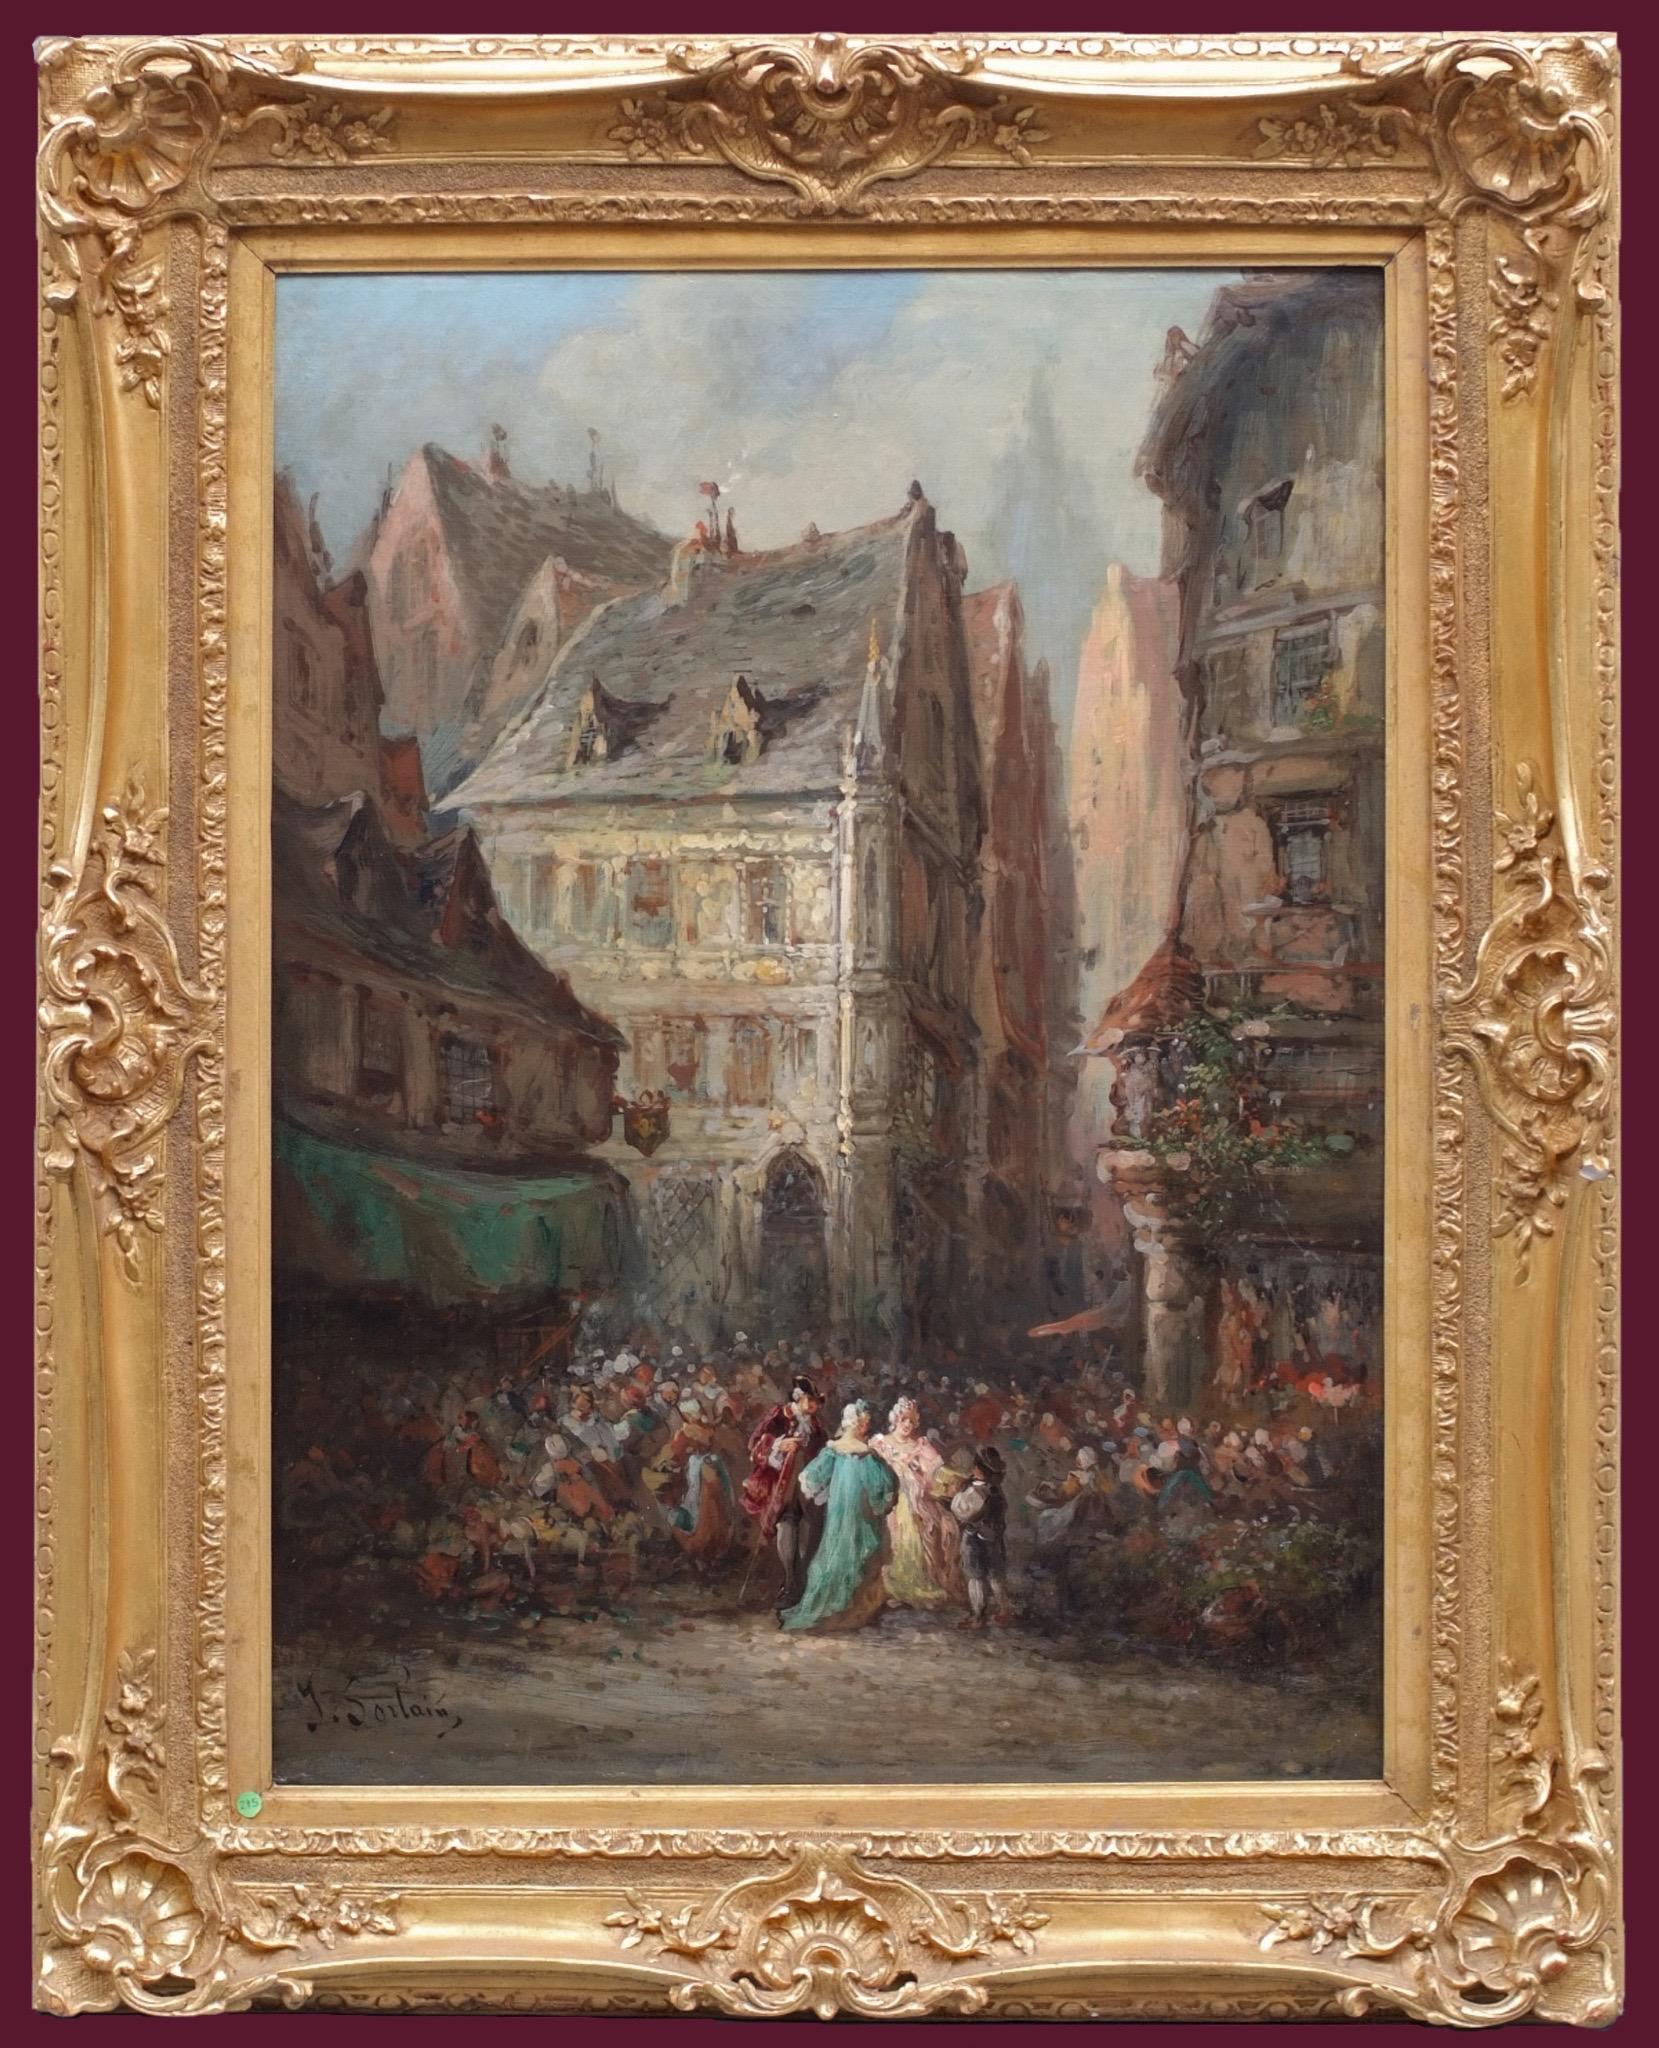 Paul Denarié (Jean Sorlain) Figurative Painting - Painting of Lively Market in Rouen during 18th Century 